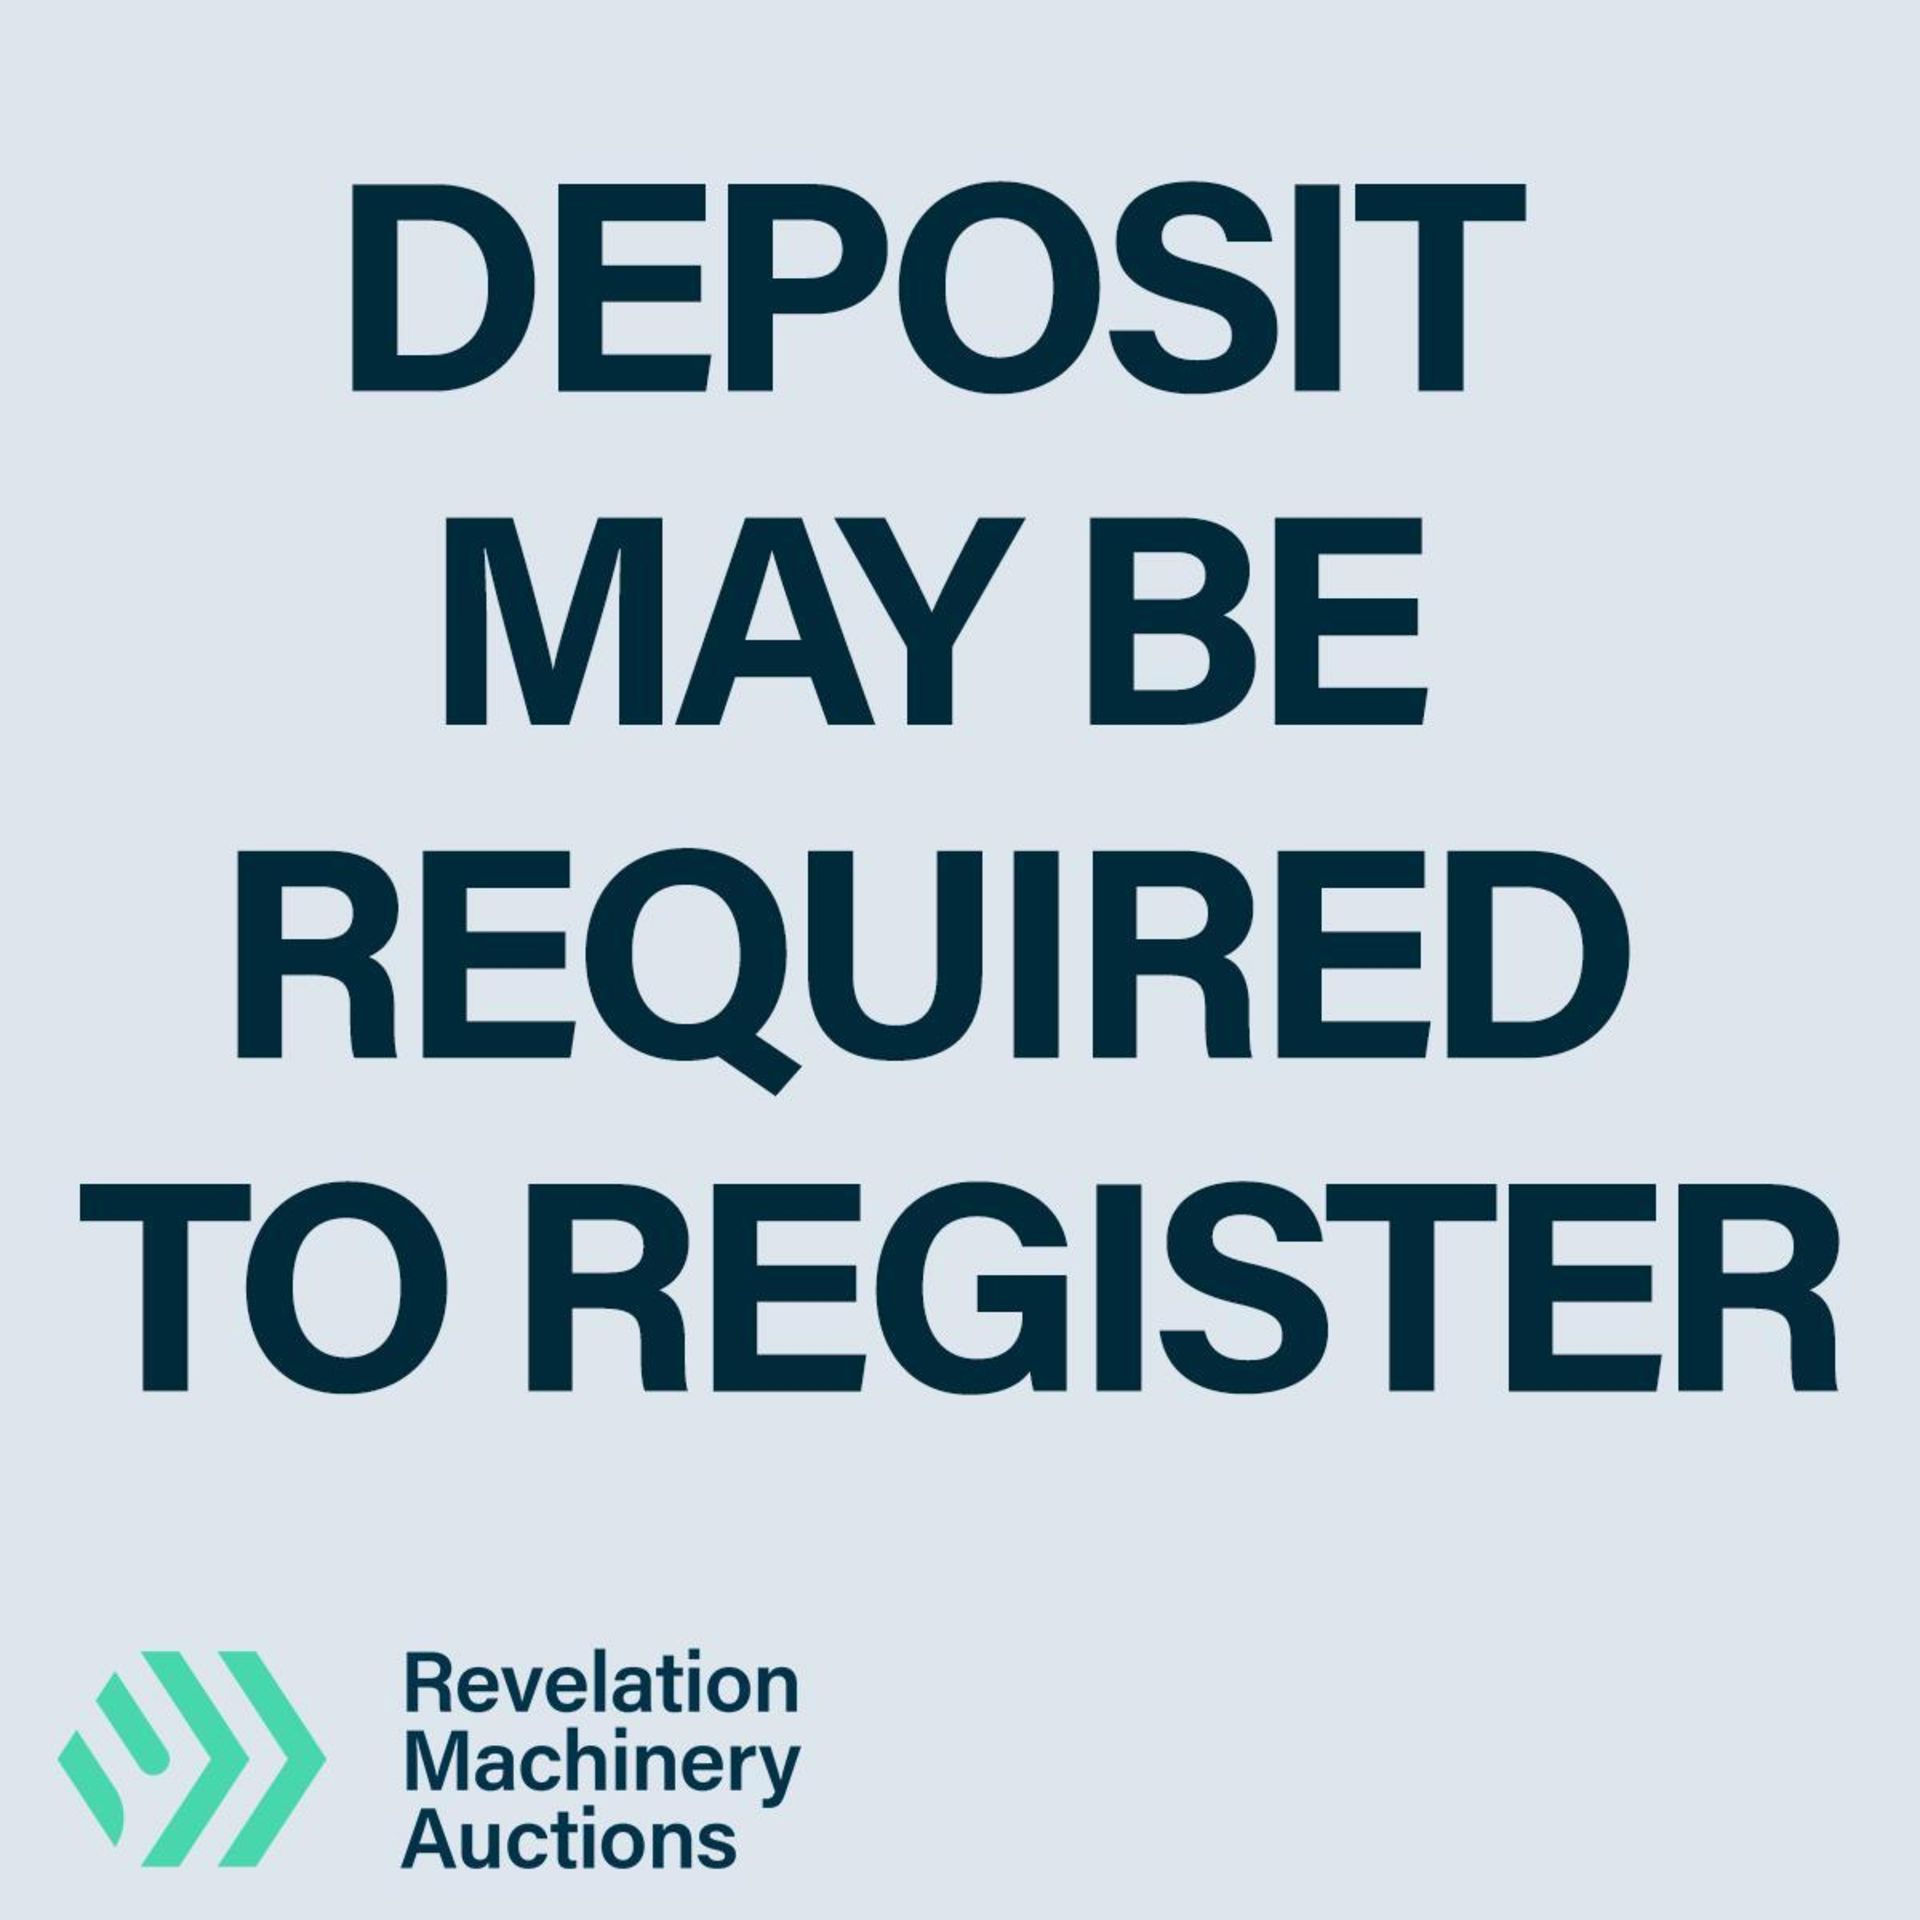 DEPOSIT MAY BE REQUIRED TO REGISTER